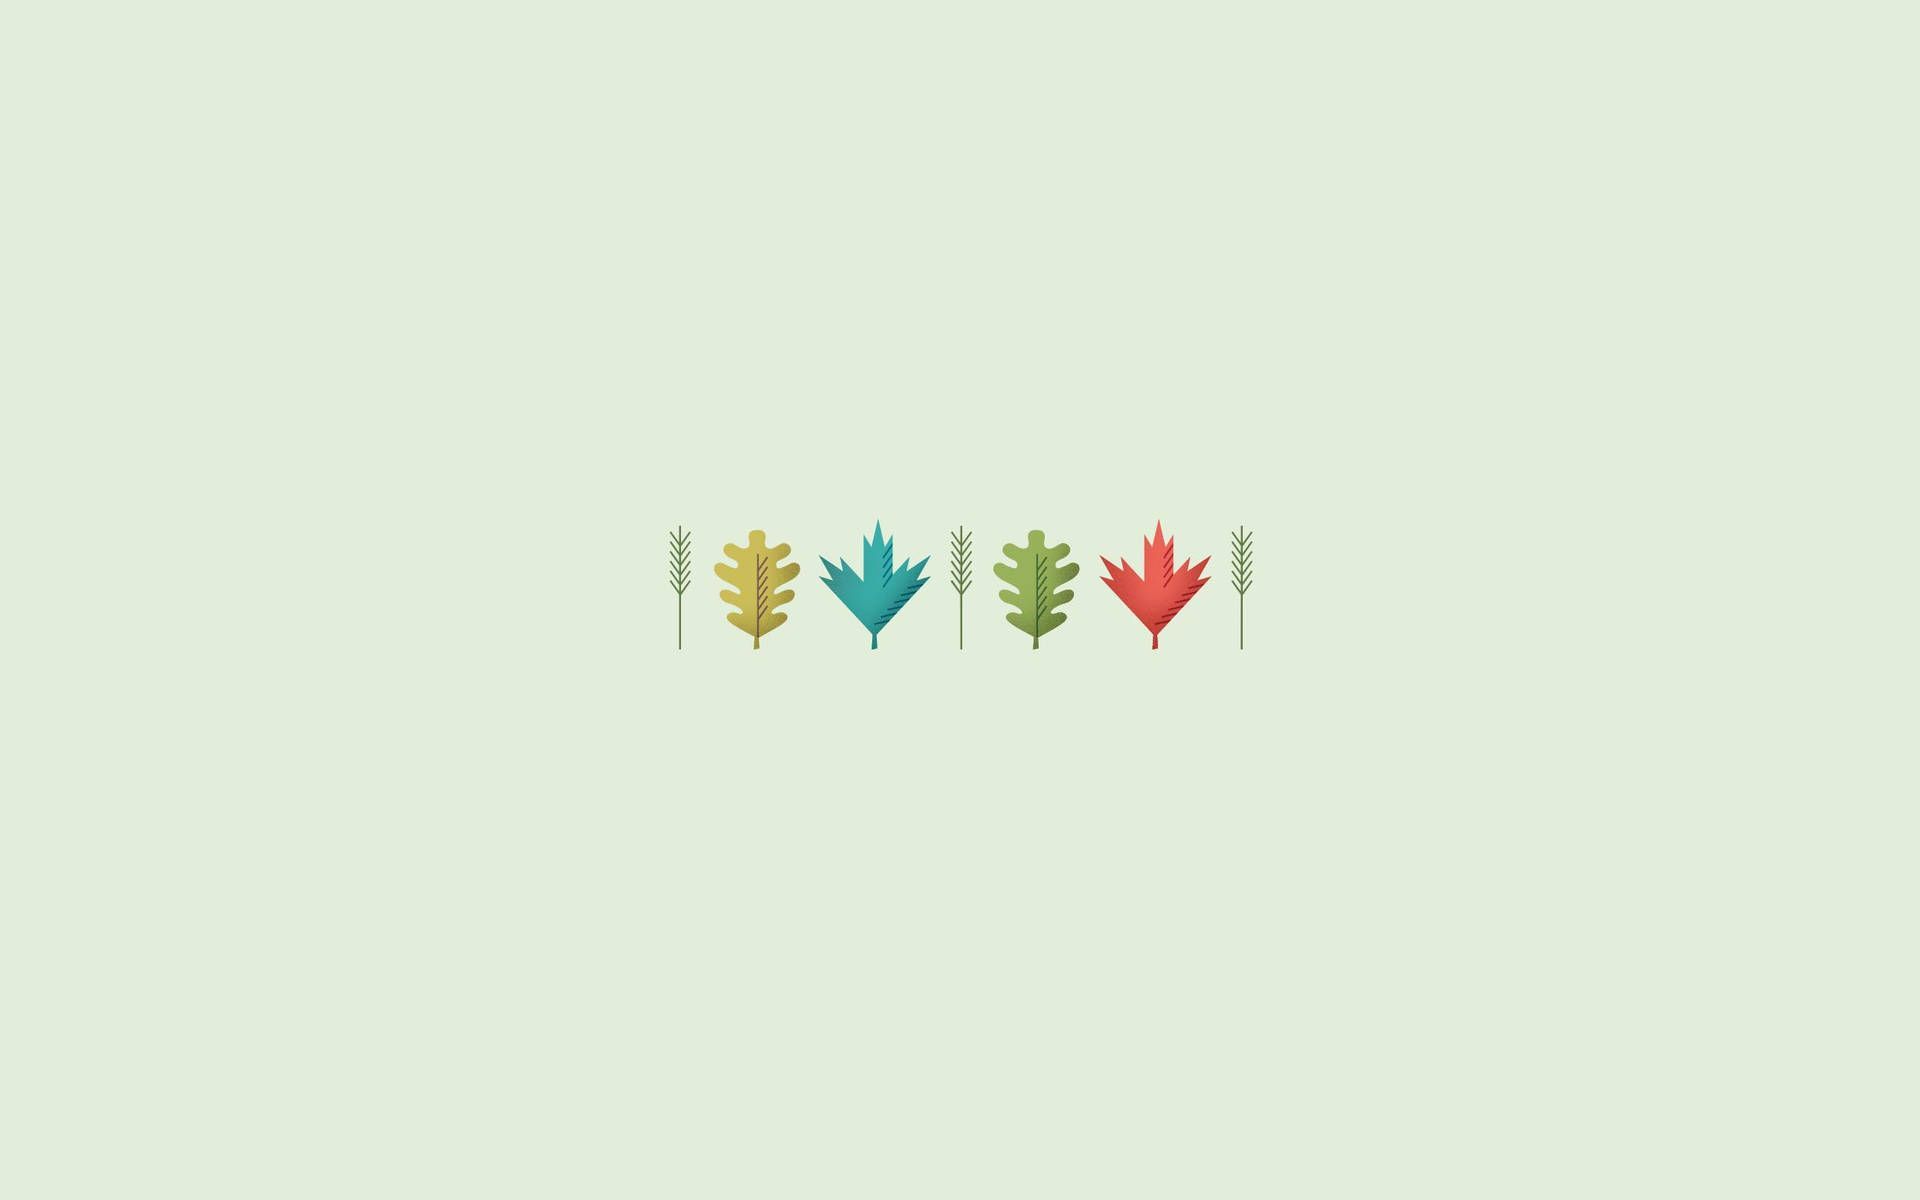 A row of five leaves in different colors - Fall, cute fall